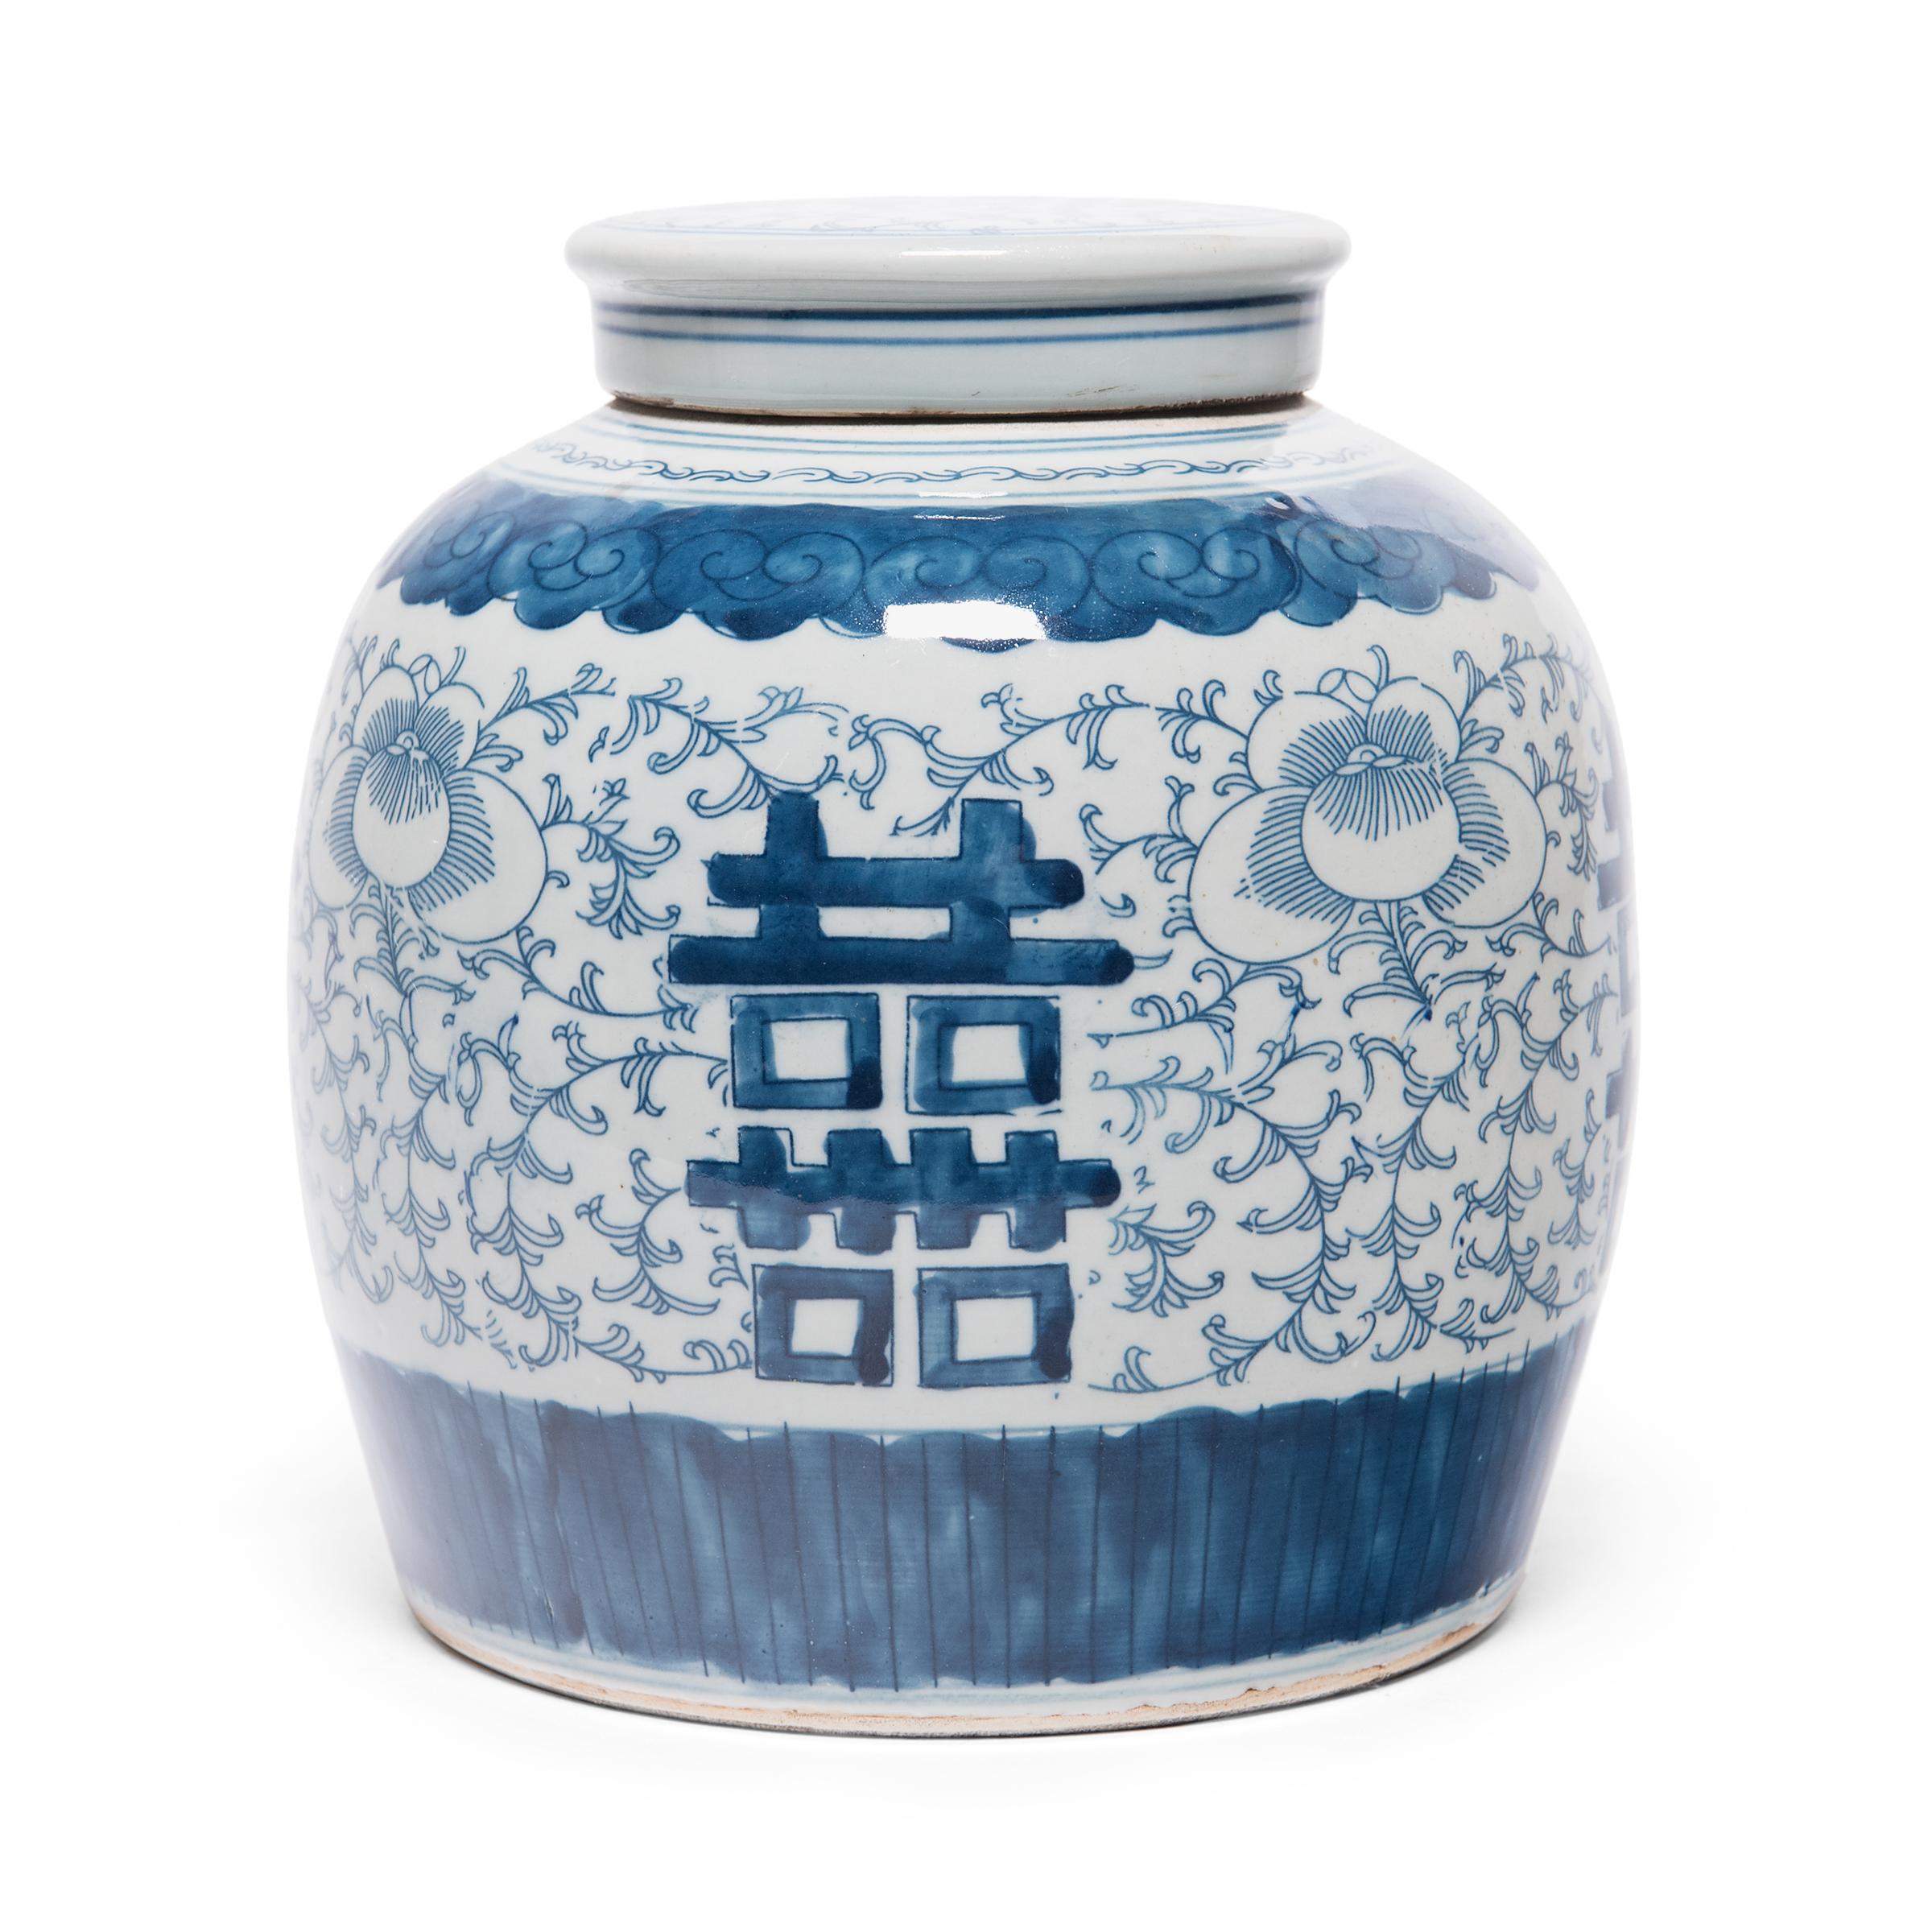 Glazed in the classic blue-and-white manner, this rounded jar offers a blessing of happiness and good fortune. Painted on either side of the jar is the? symbol for 